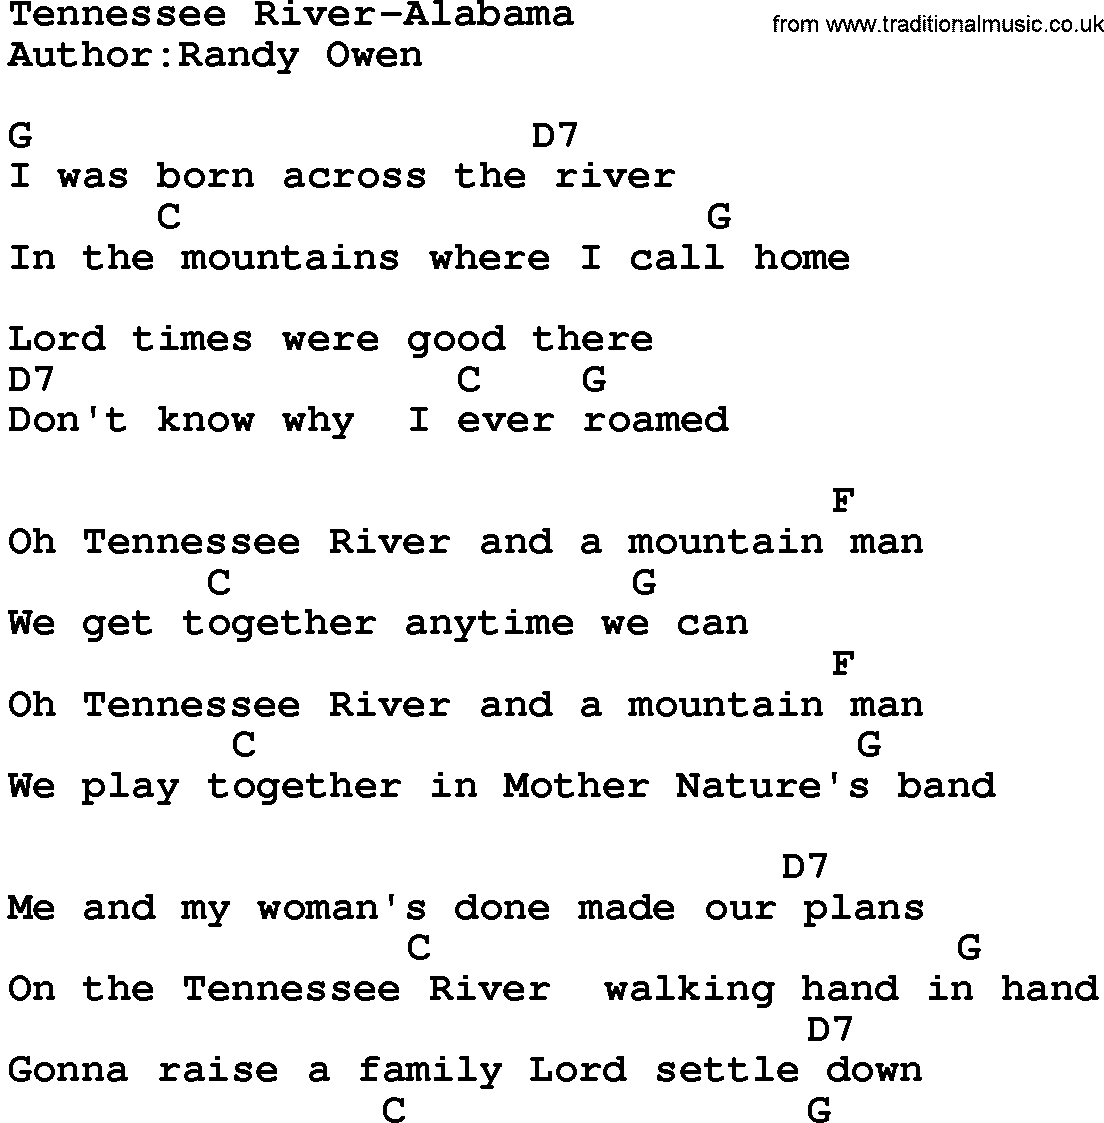 Country music song: Tennessee River-Alabama lyrics and chords